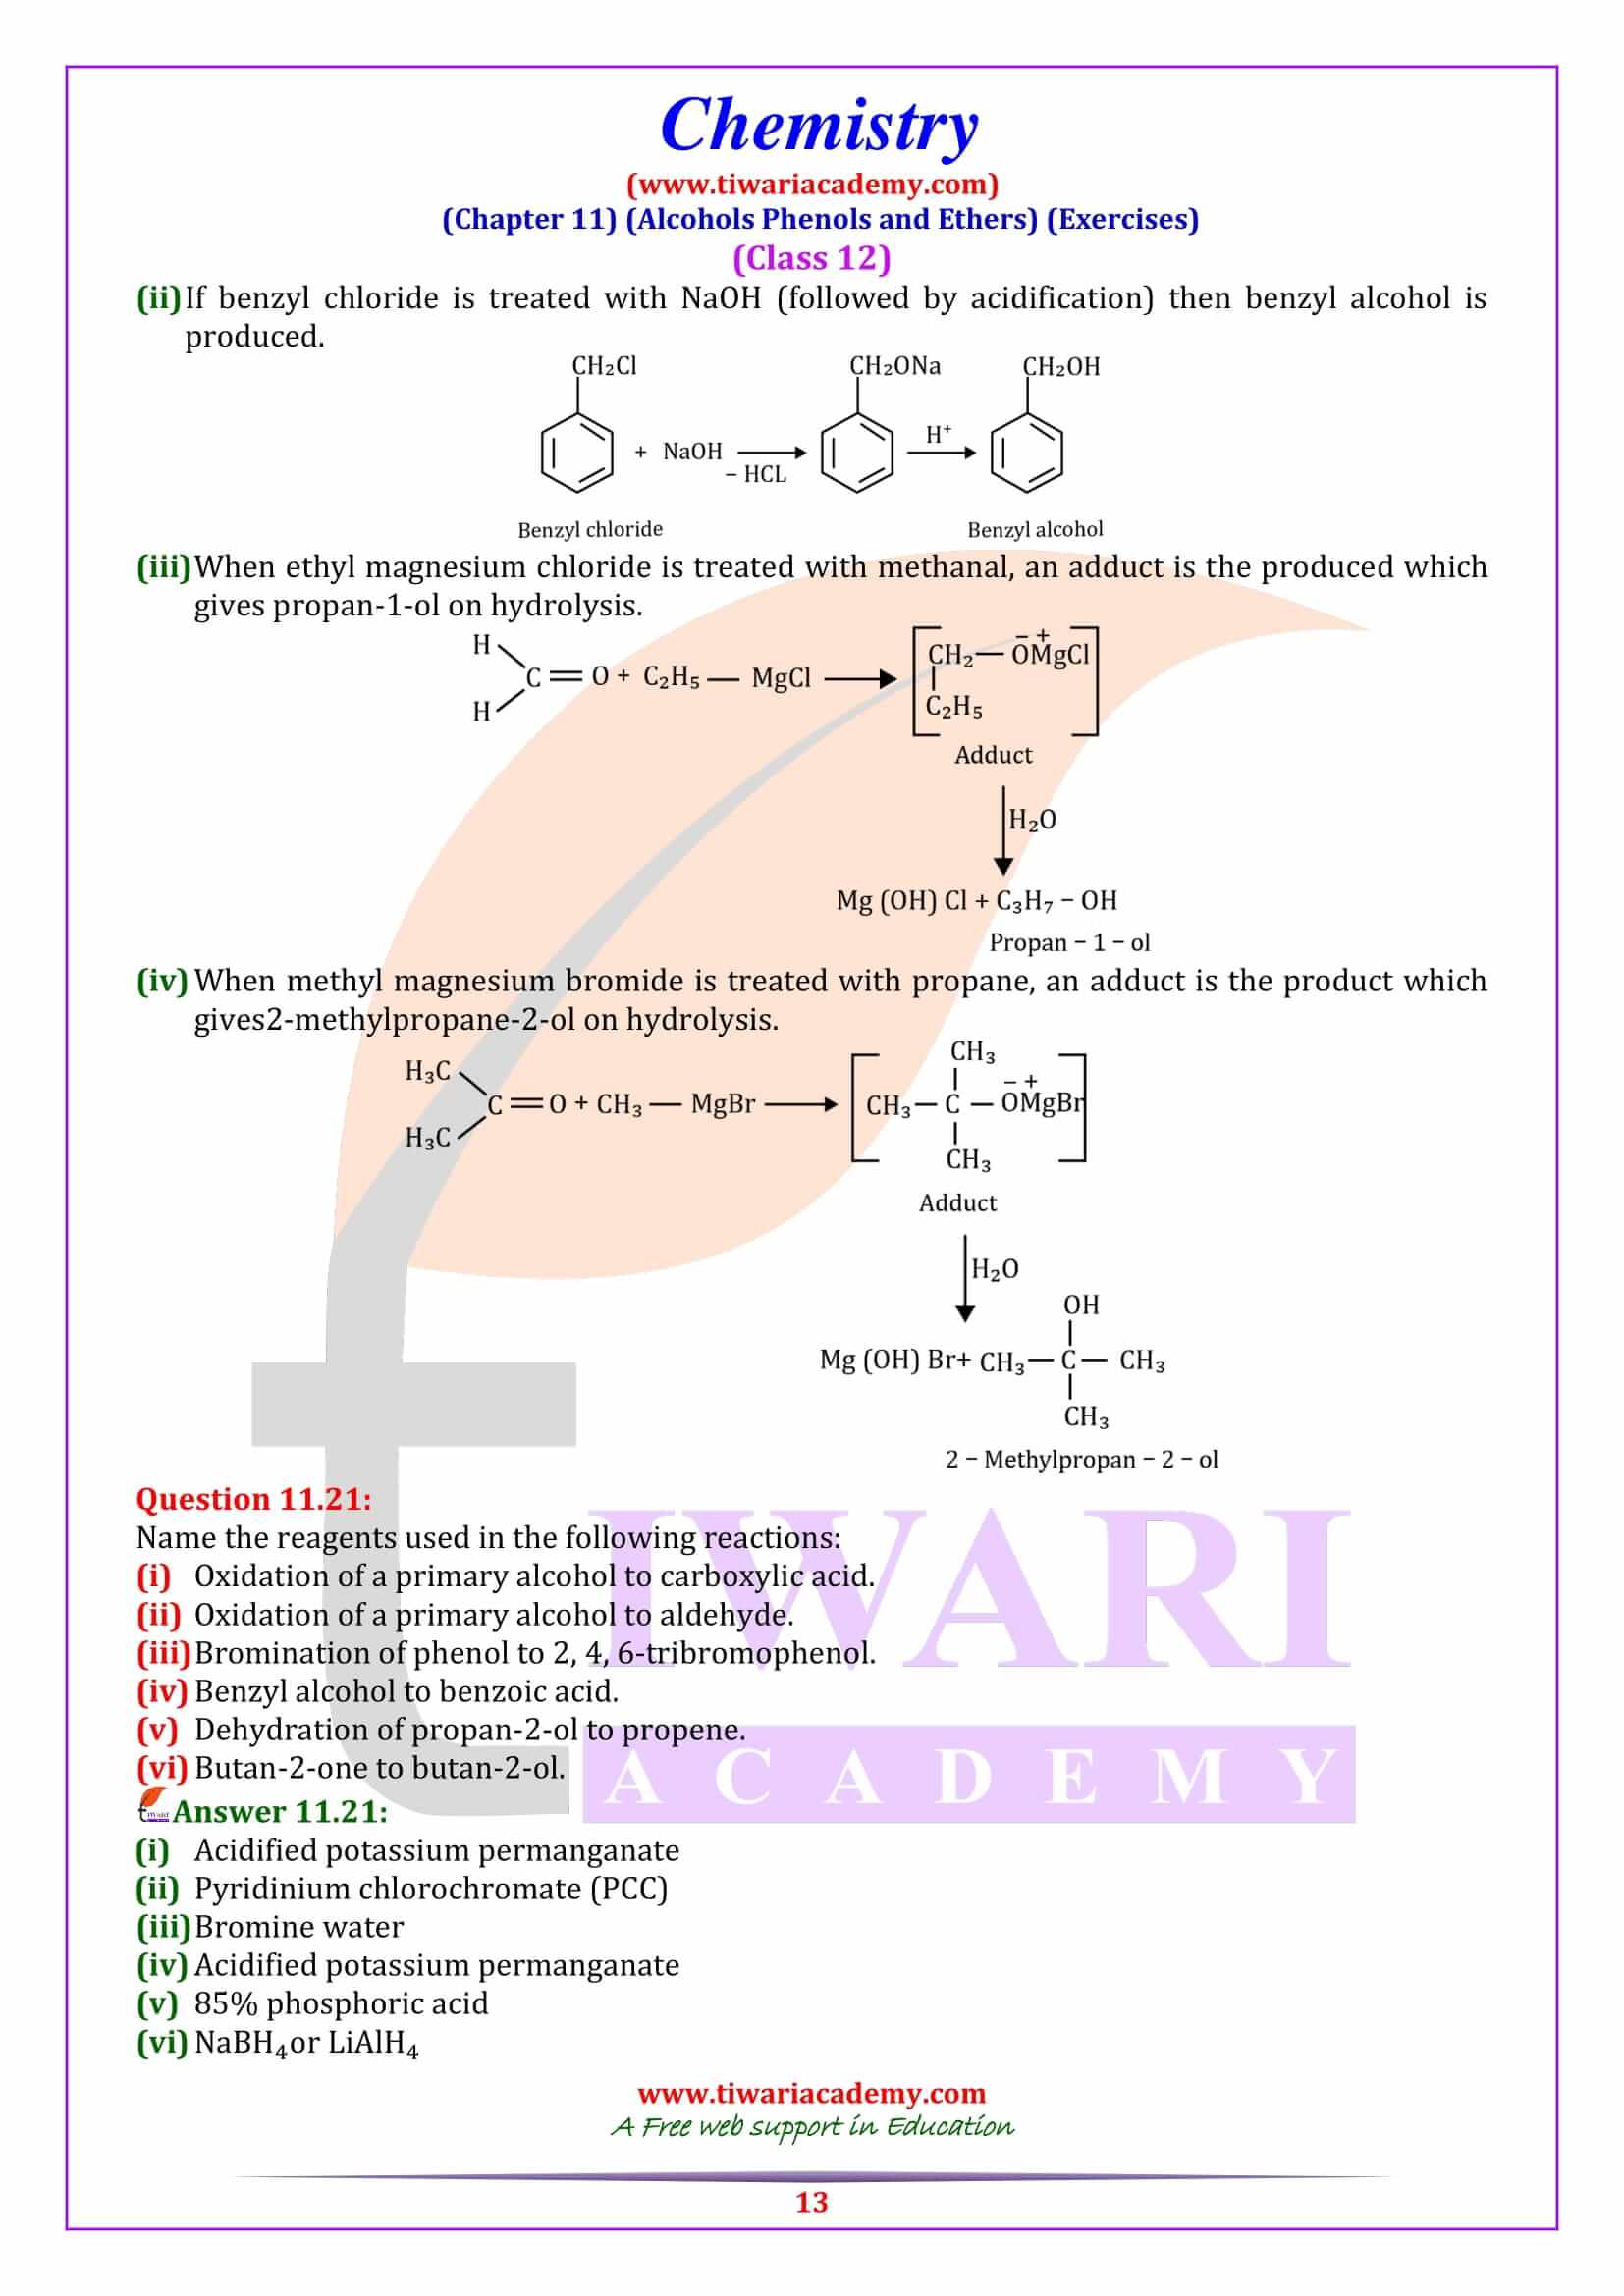 NCERT Solutions for Class 12 Chemistry Chapter 11 all answers guide